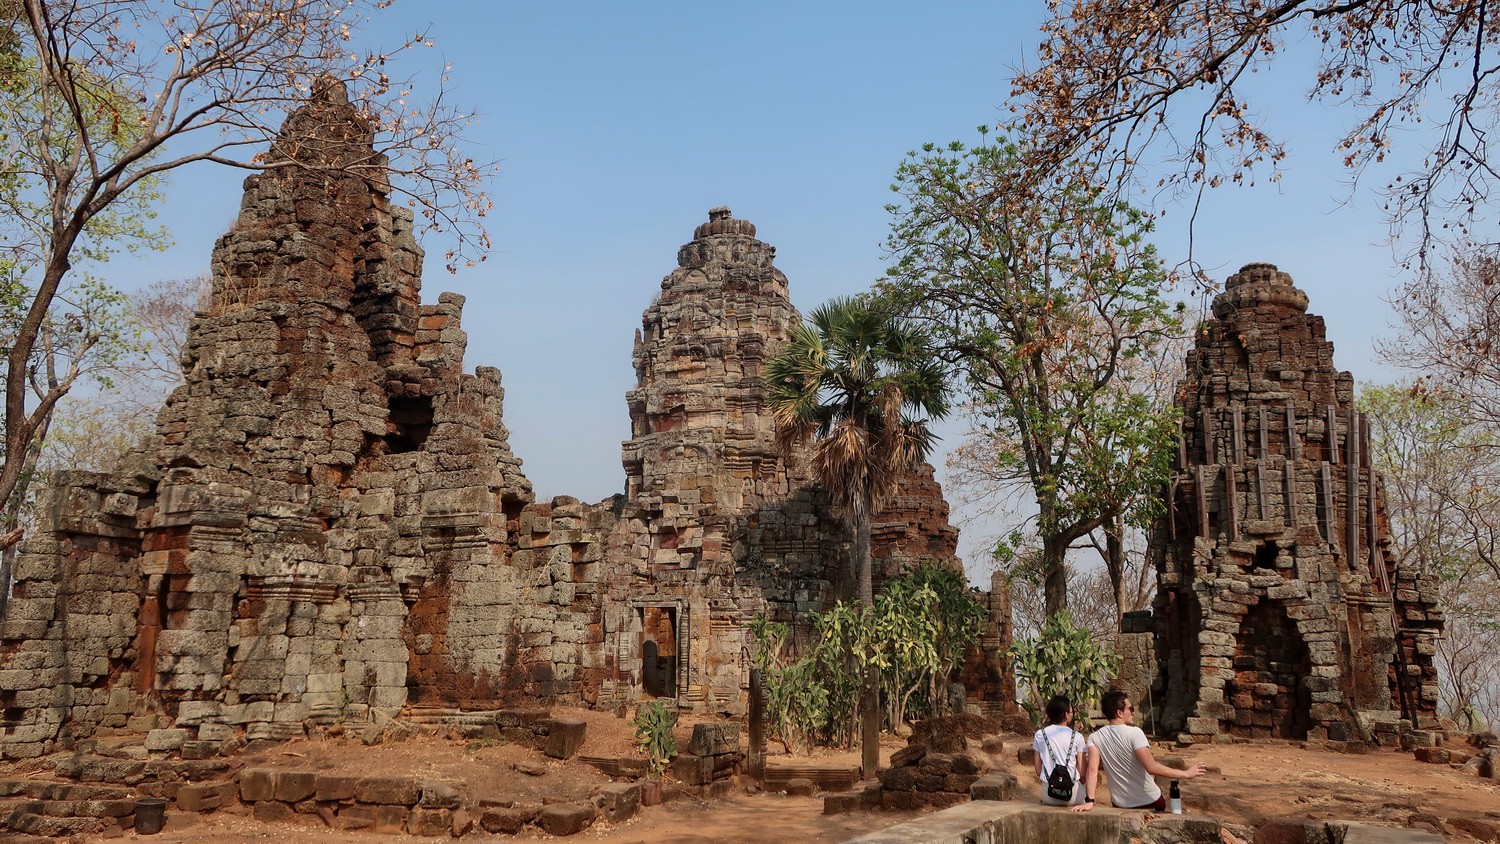 Wat Banan which is located on a hill approximately 20 kilometers south of Battambang